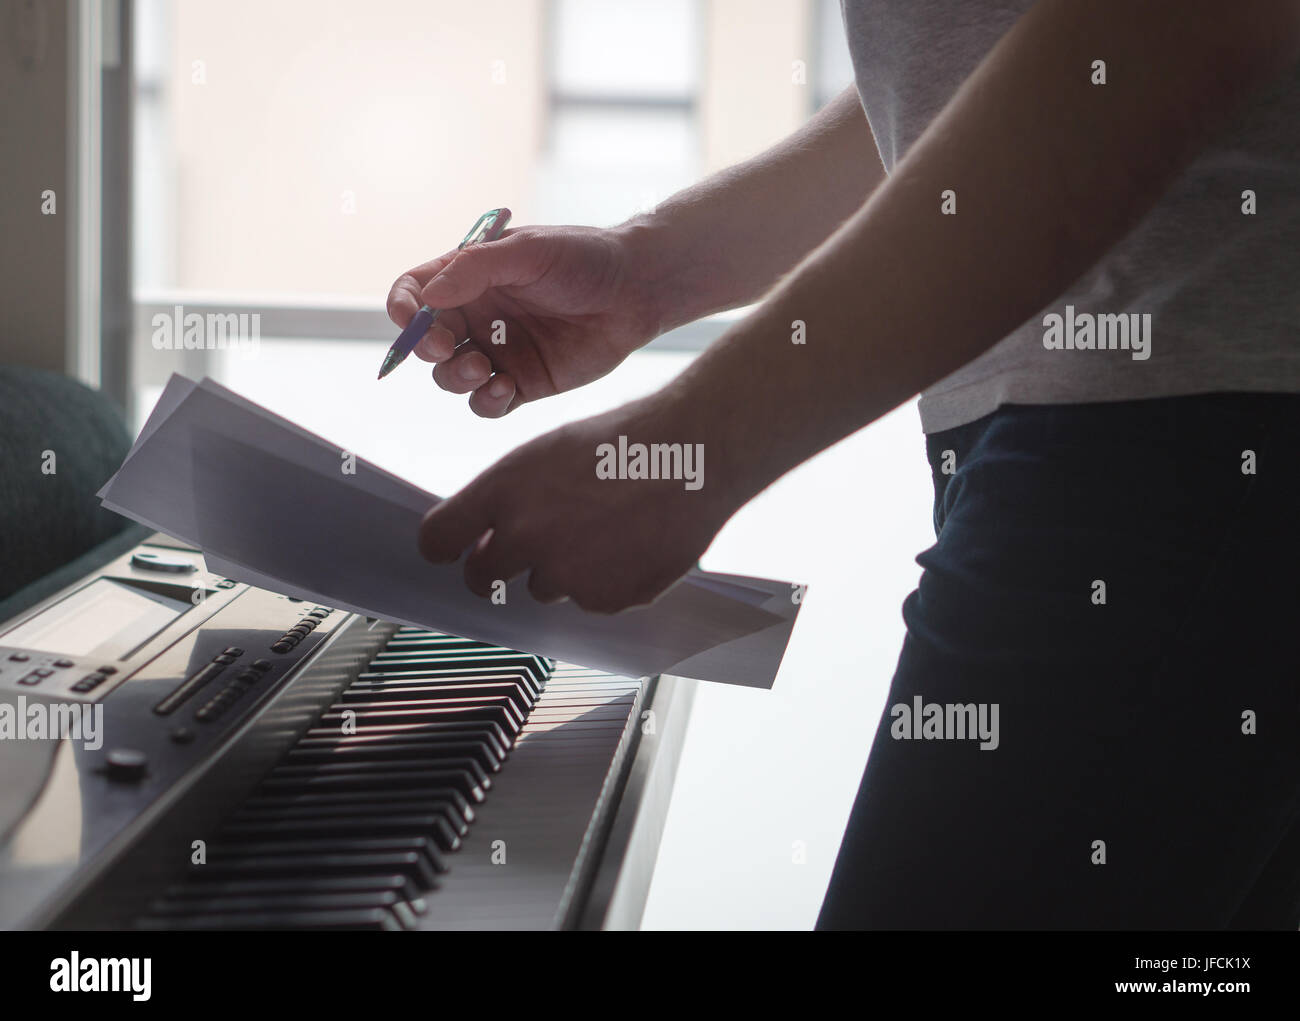 Musician brainstorming and innovating new song ideas at piano by the window. Composer writing notes to paper or planning arrangement. Stock Photo